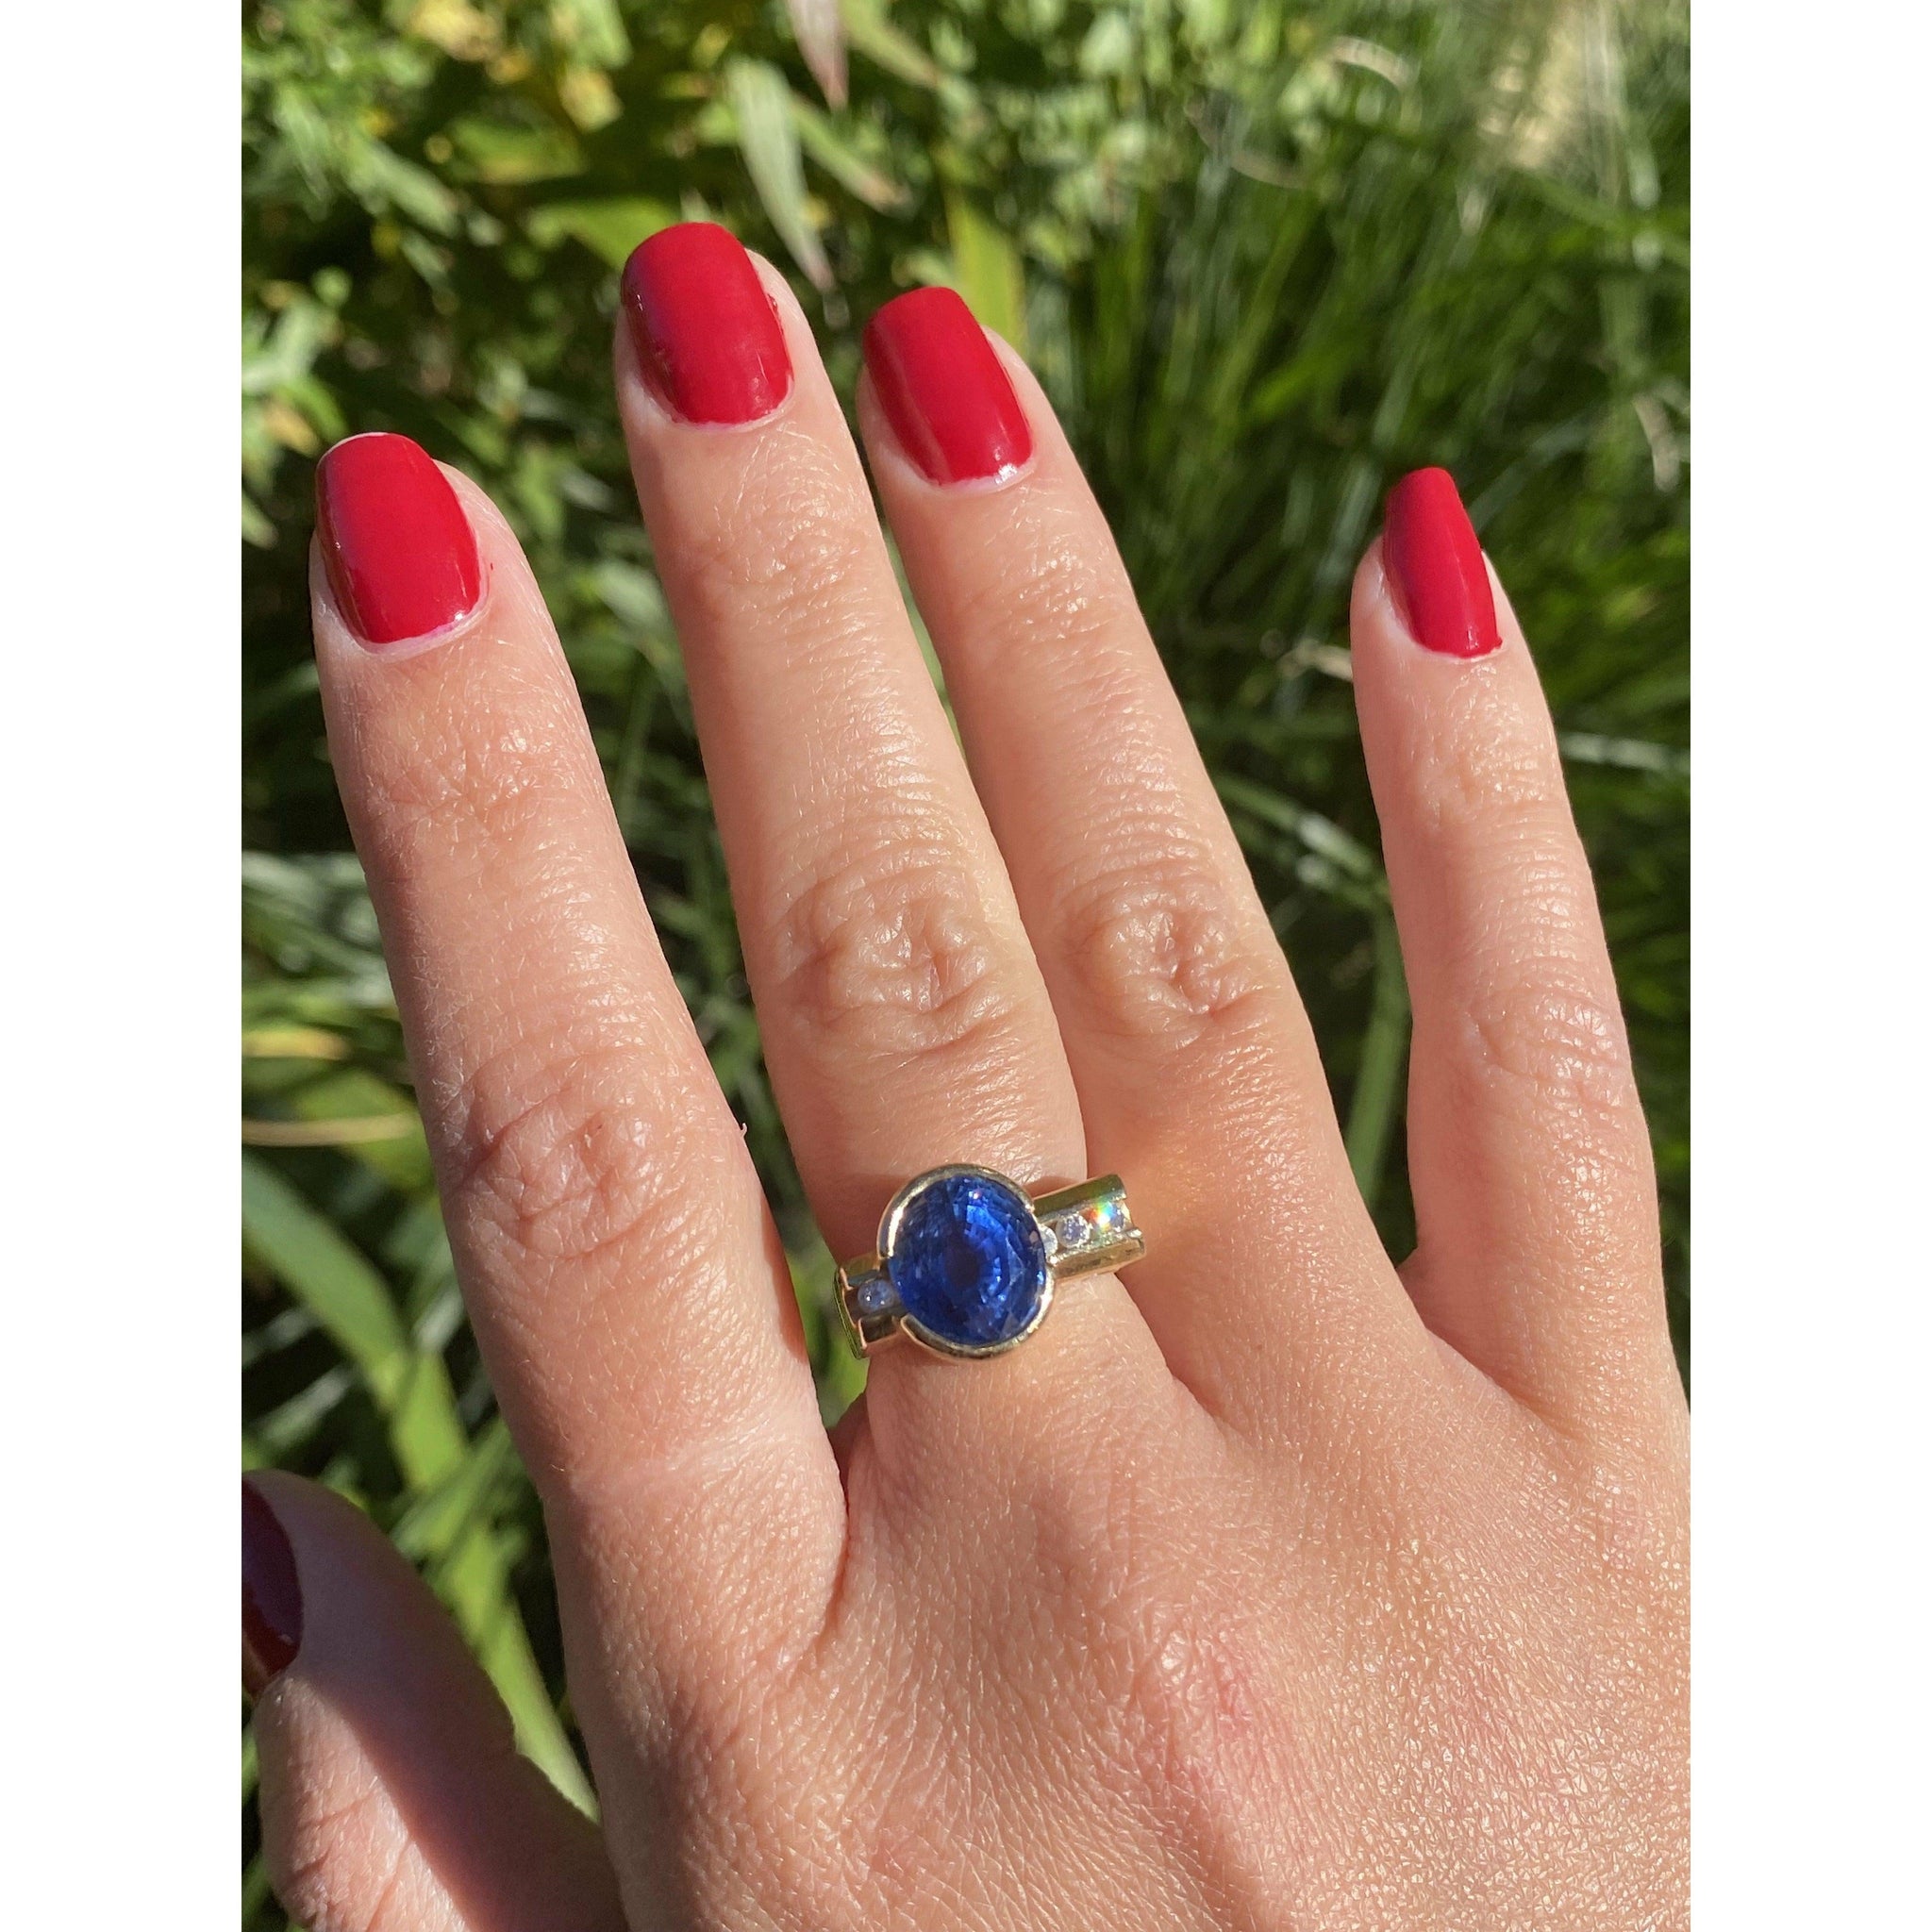 5 carat Oval Cut Ceylon Blue Sapphire Ring in 14K Solid Gold - ASSAY